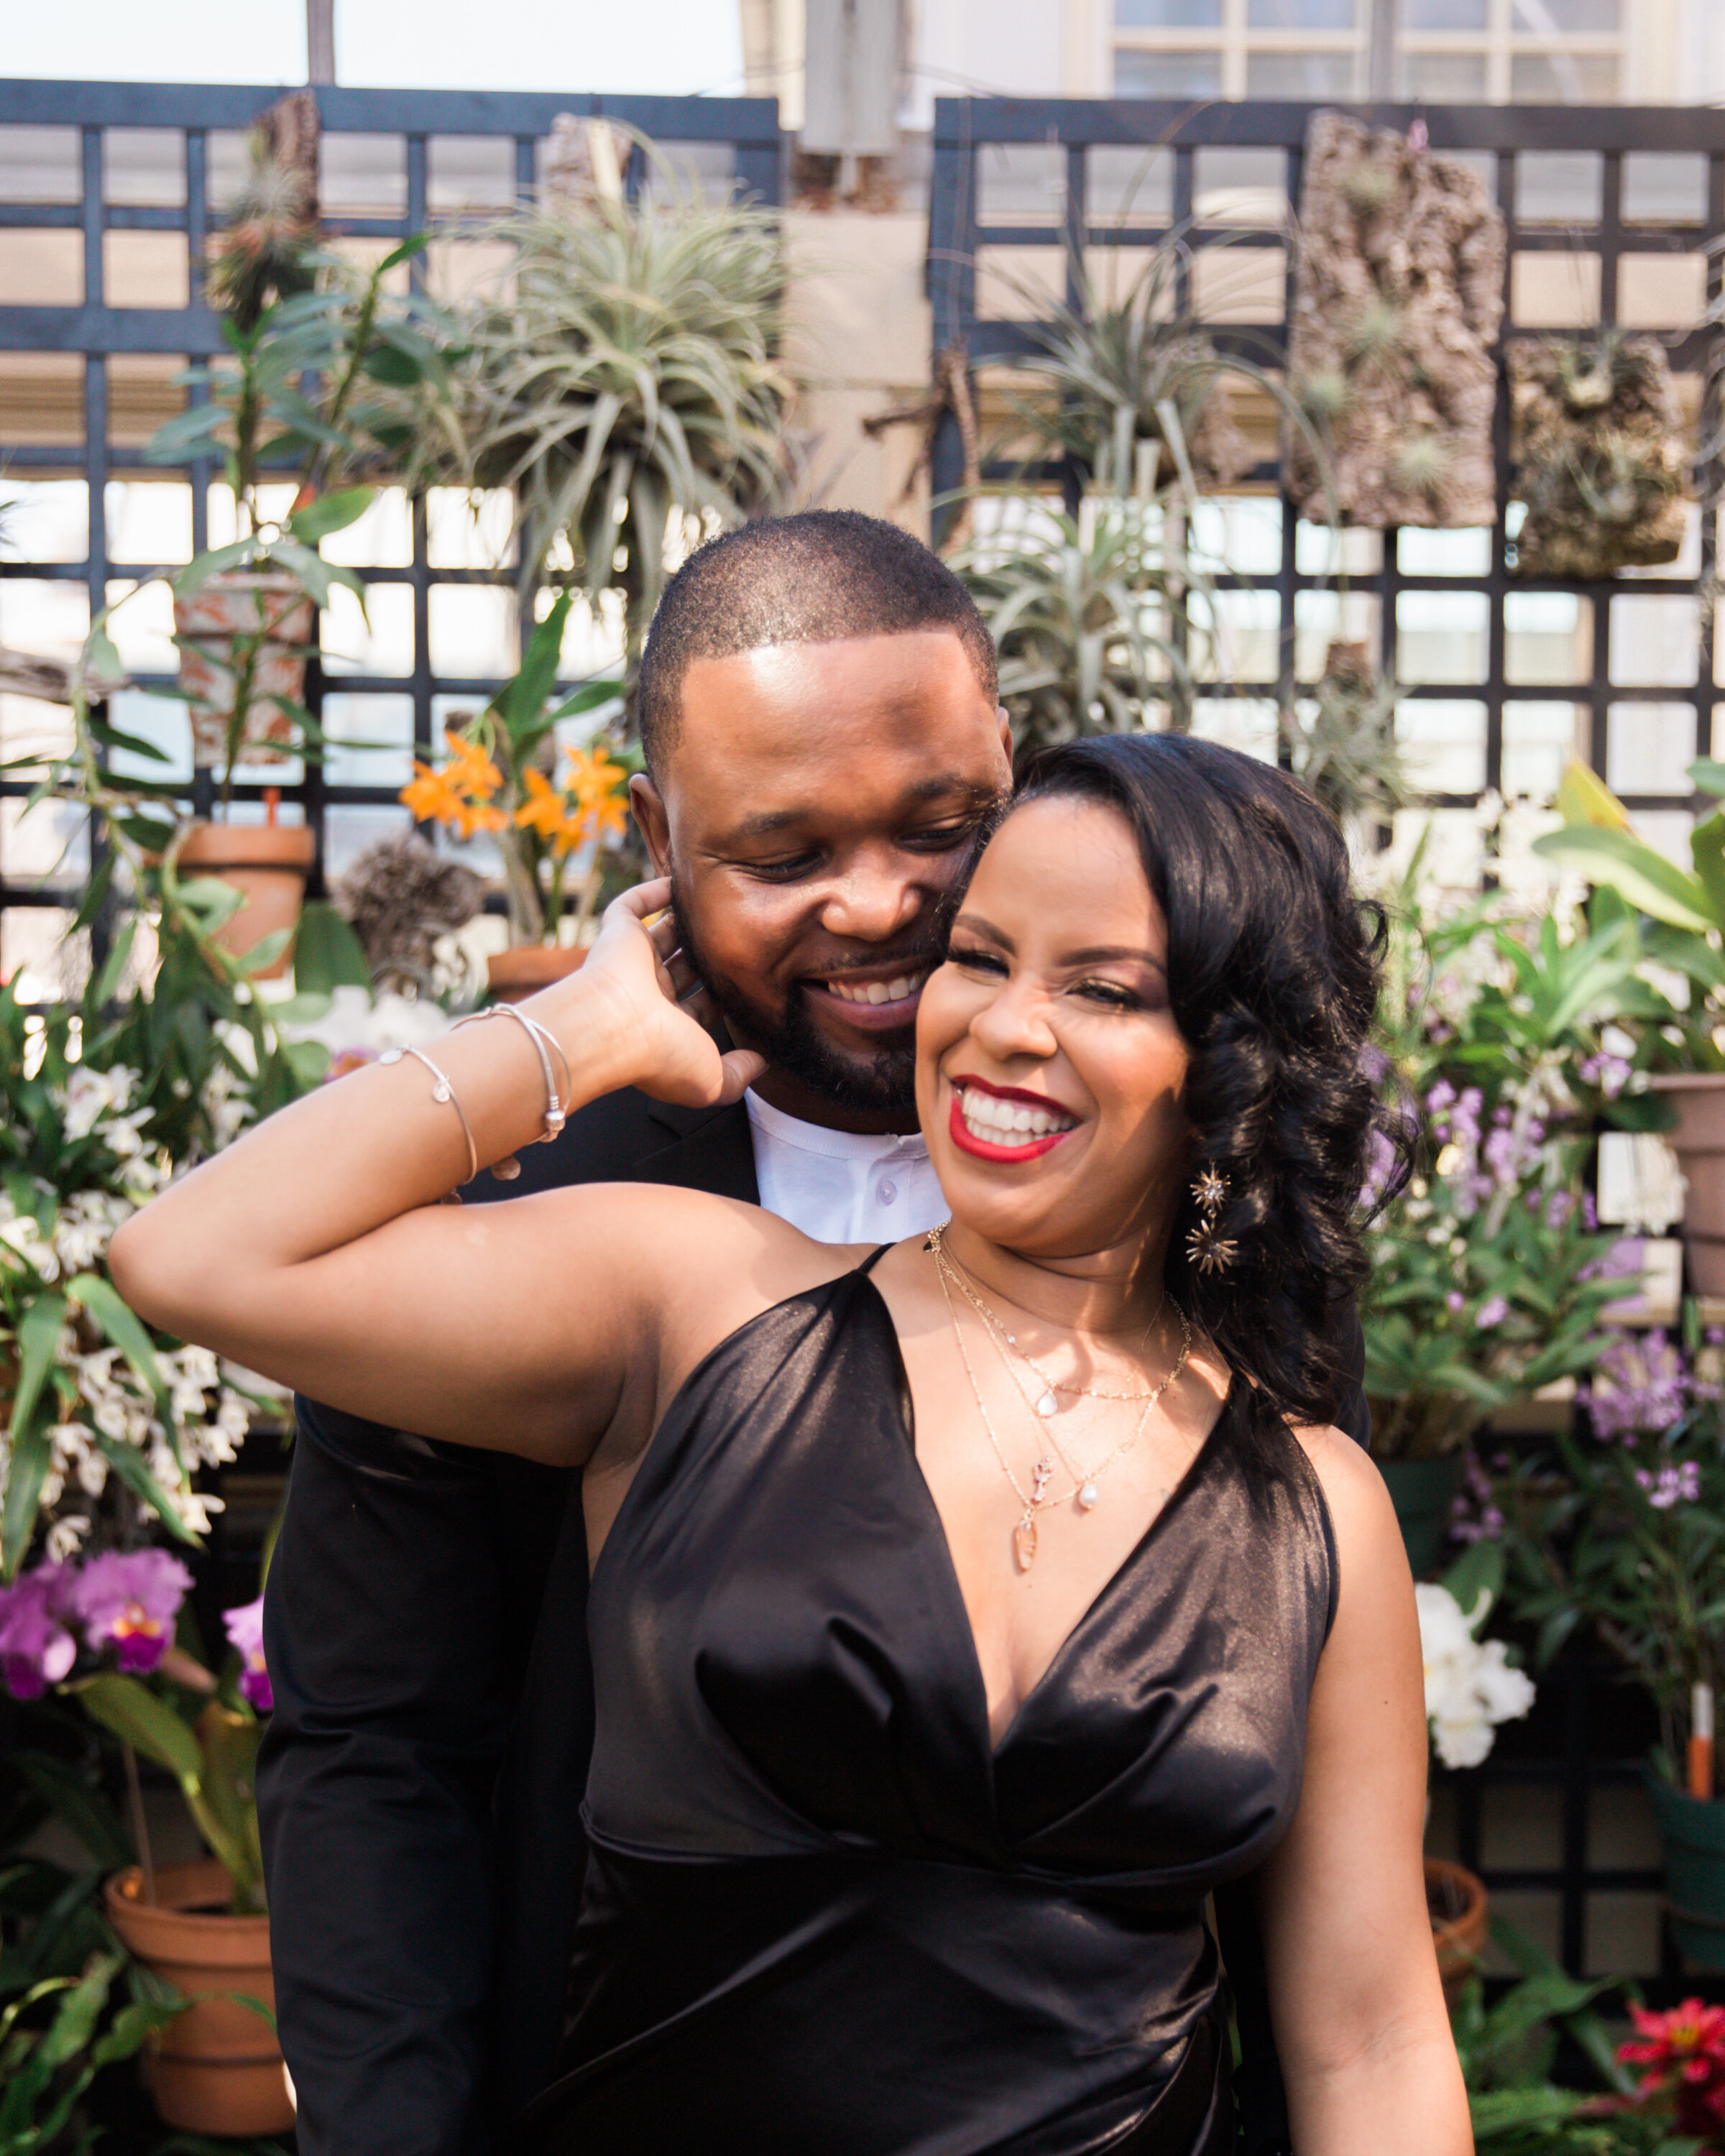 Best Wedding Photographers in Baltimore Free Engagement Session Maryland Megapixels Media Photography Rawlings Conservatory Engagement Photos Black Dress Black Couple in Love-34.jpg